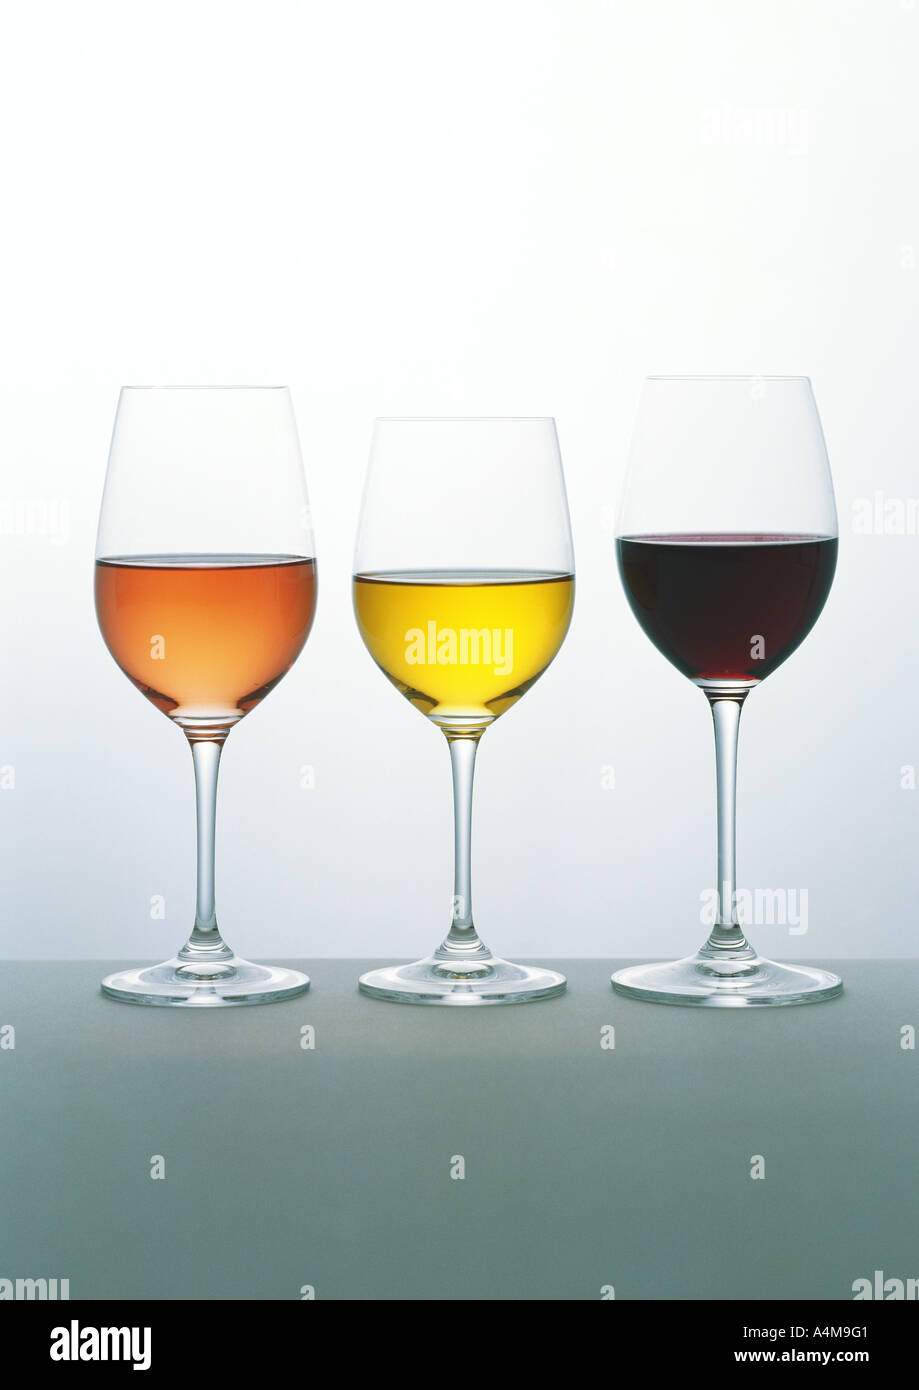 Glasses of white, rosŽ and red wines Stock Photo